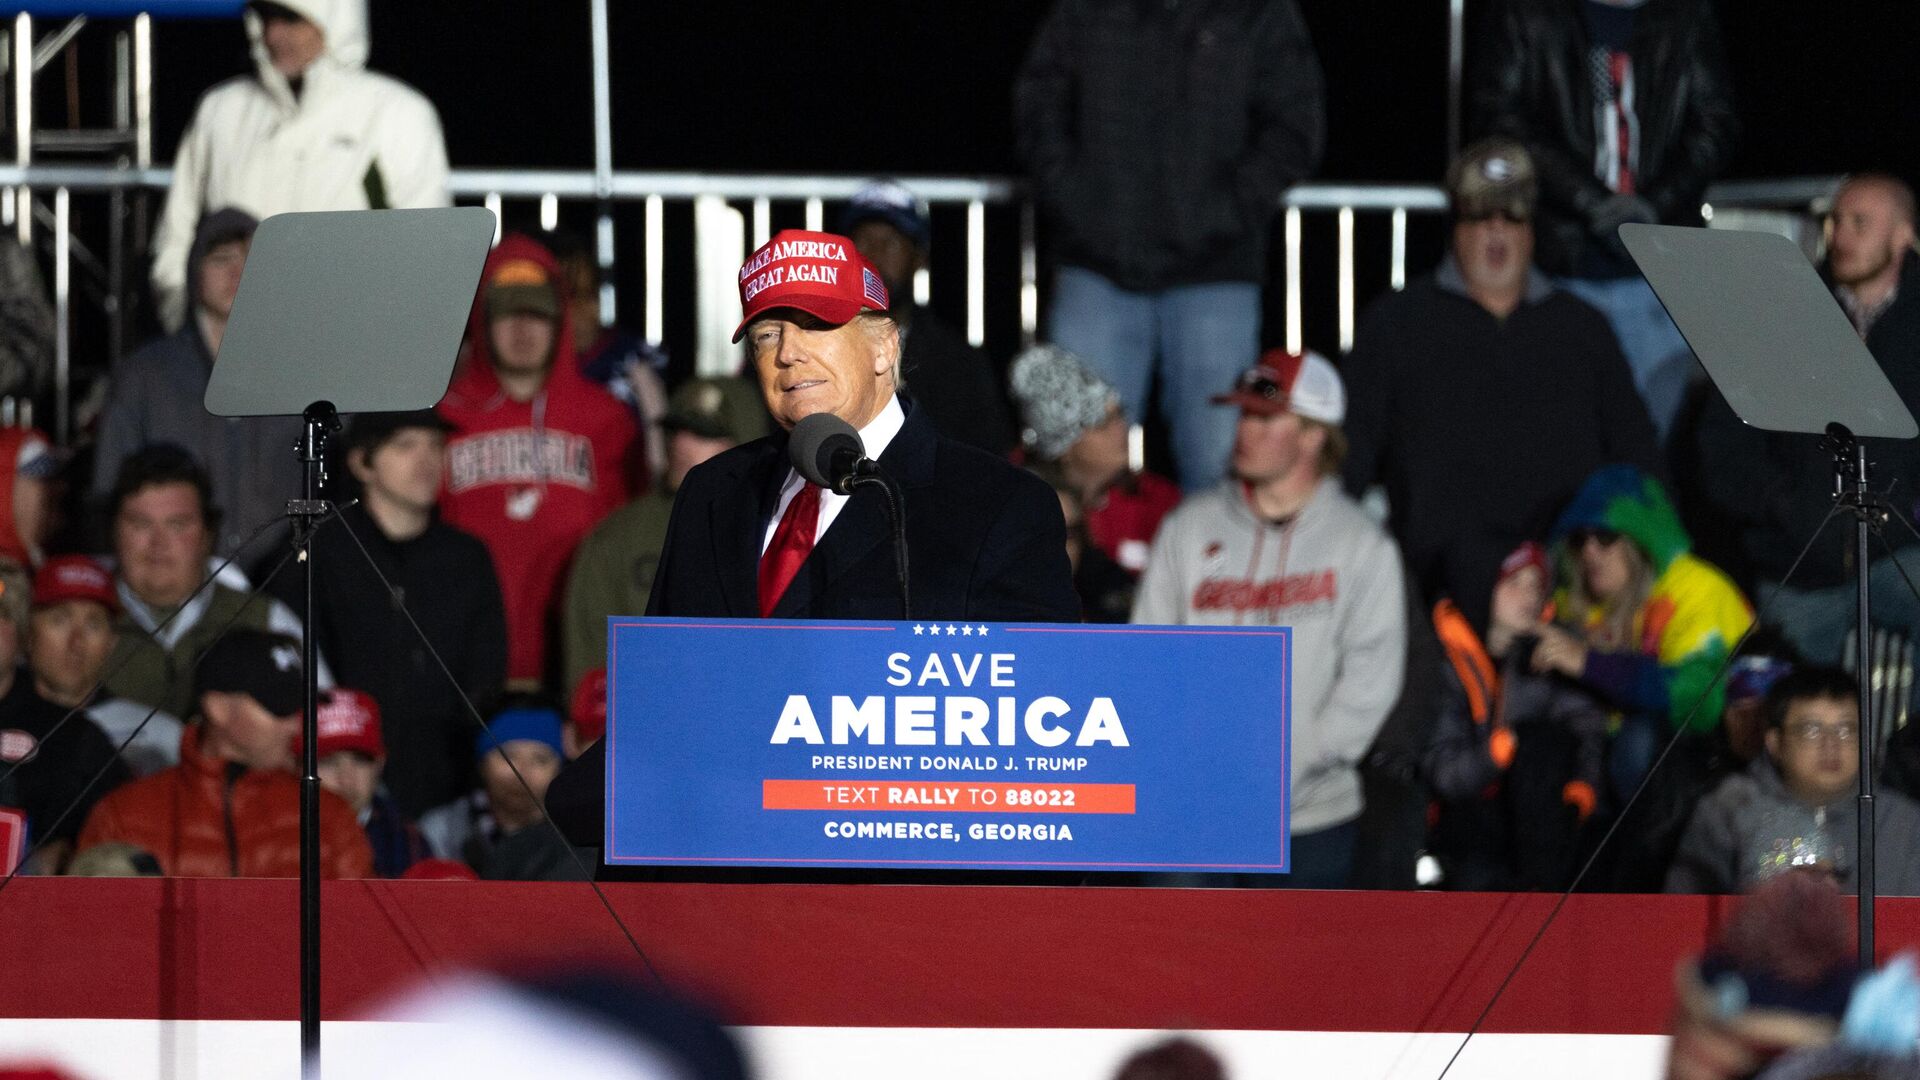  Former U.S. President Donald Trump speaks during a rally at the Banks County Dragway on March 26, 2022 in Commerce, Georgia - Sputnik International, 1920, 19.04.2022